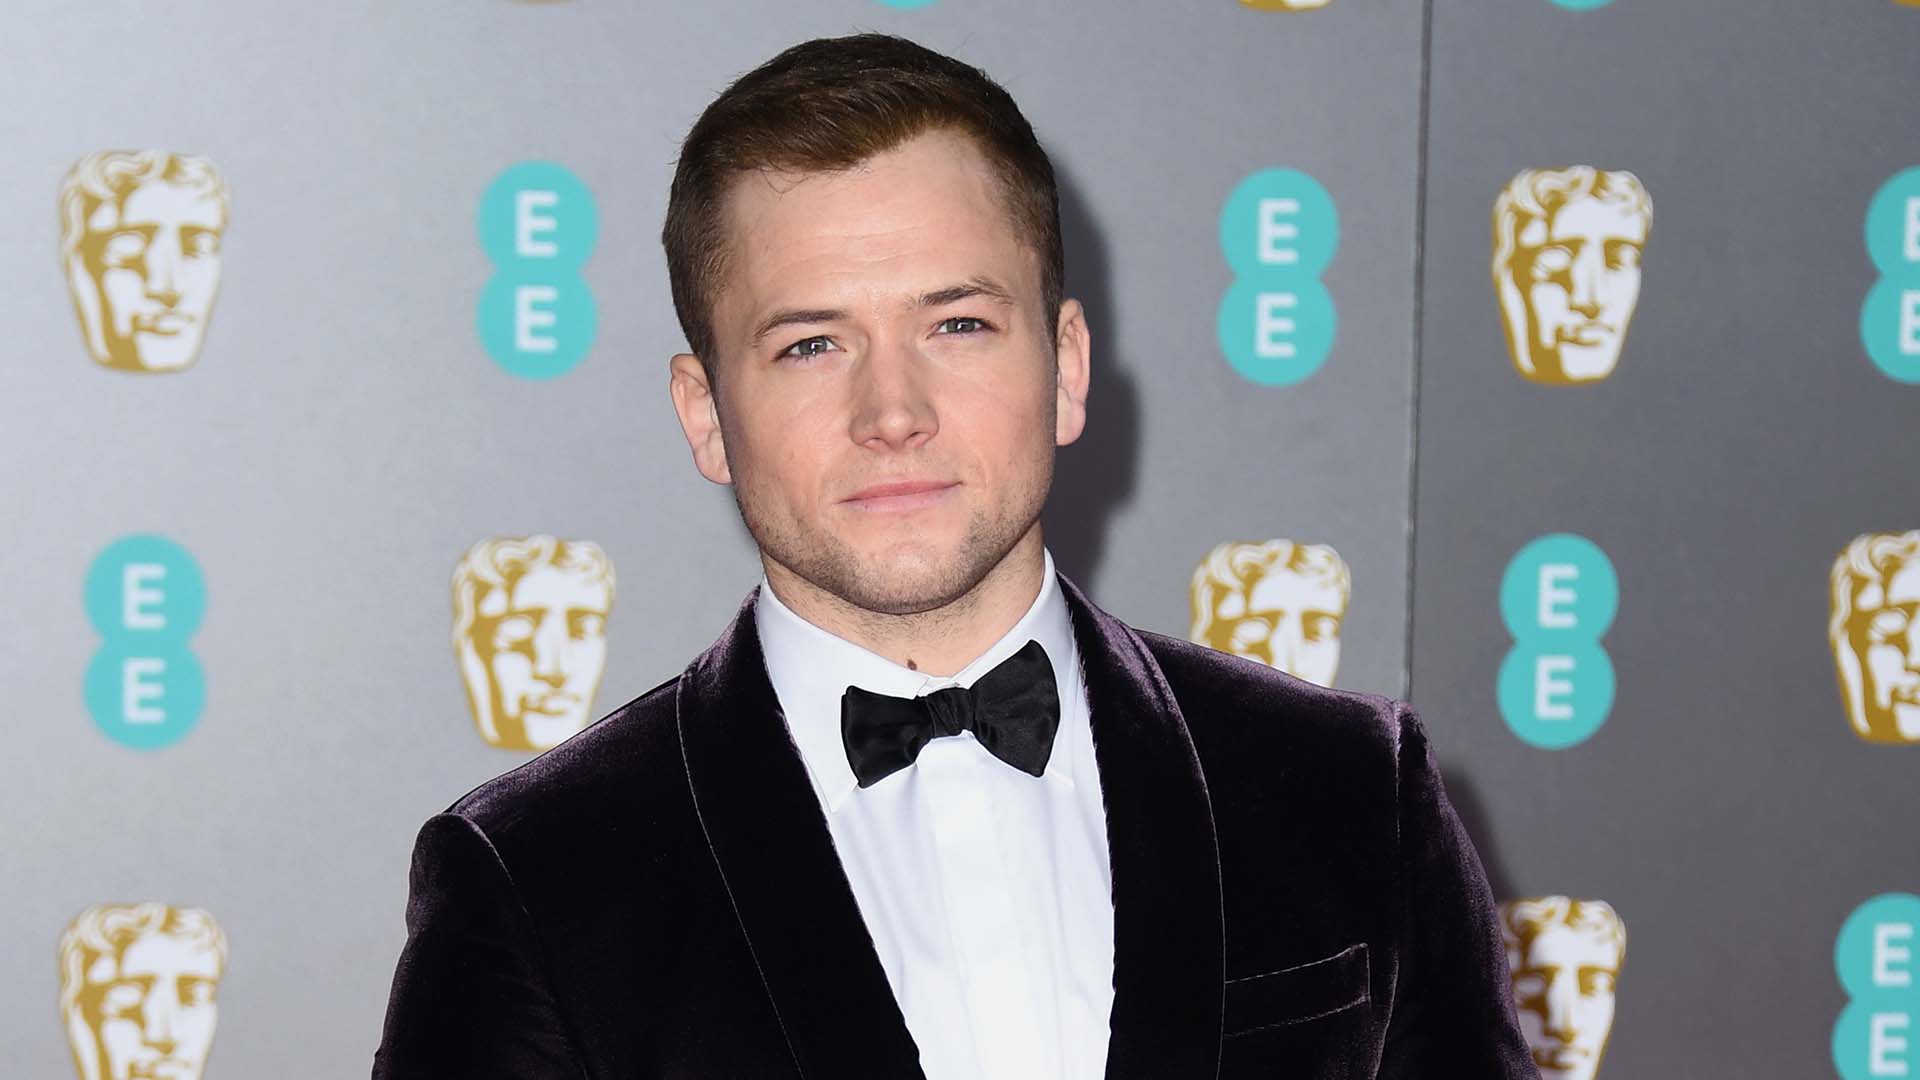 ‘Kingsman’ Is Getting a Fourth Movie With Taron Egerton Returning